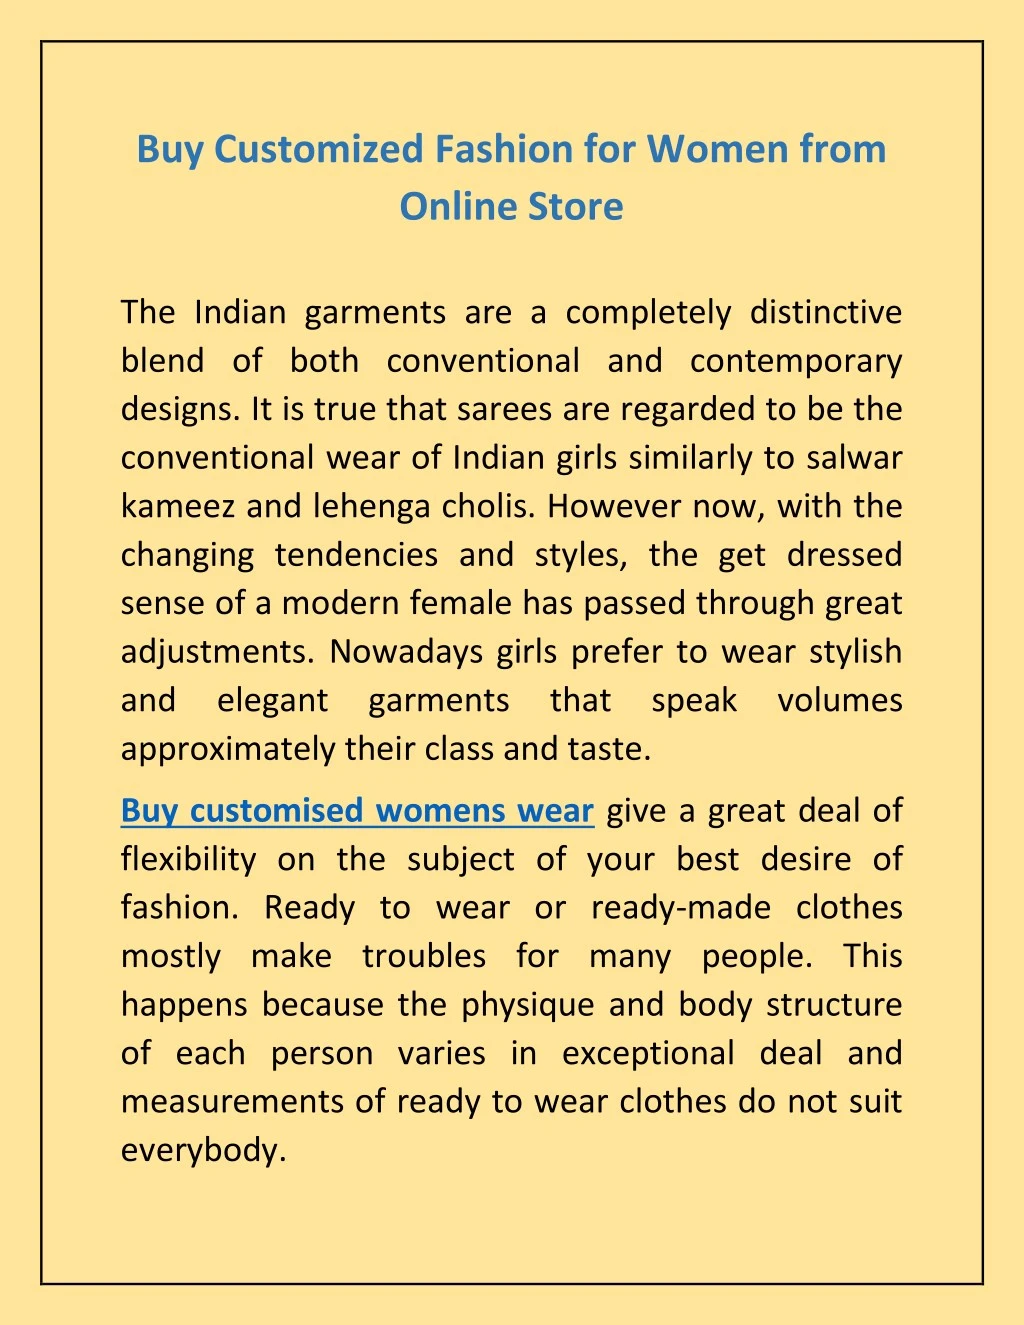 buy customized fashion for women from online store